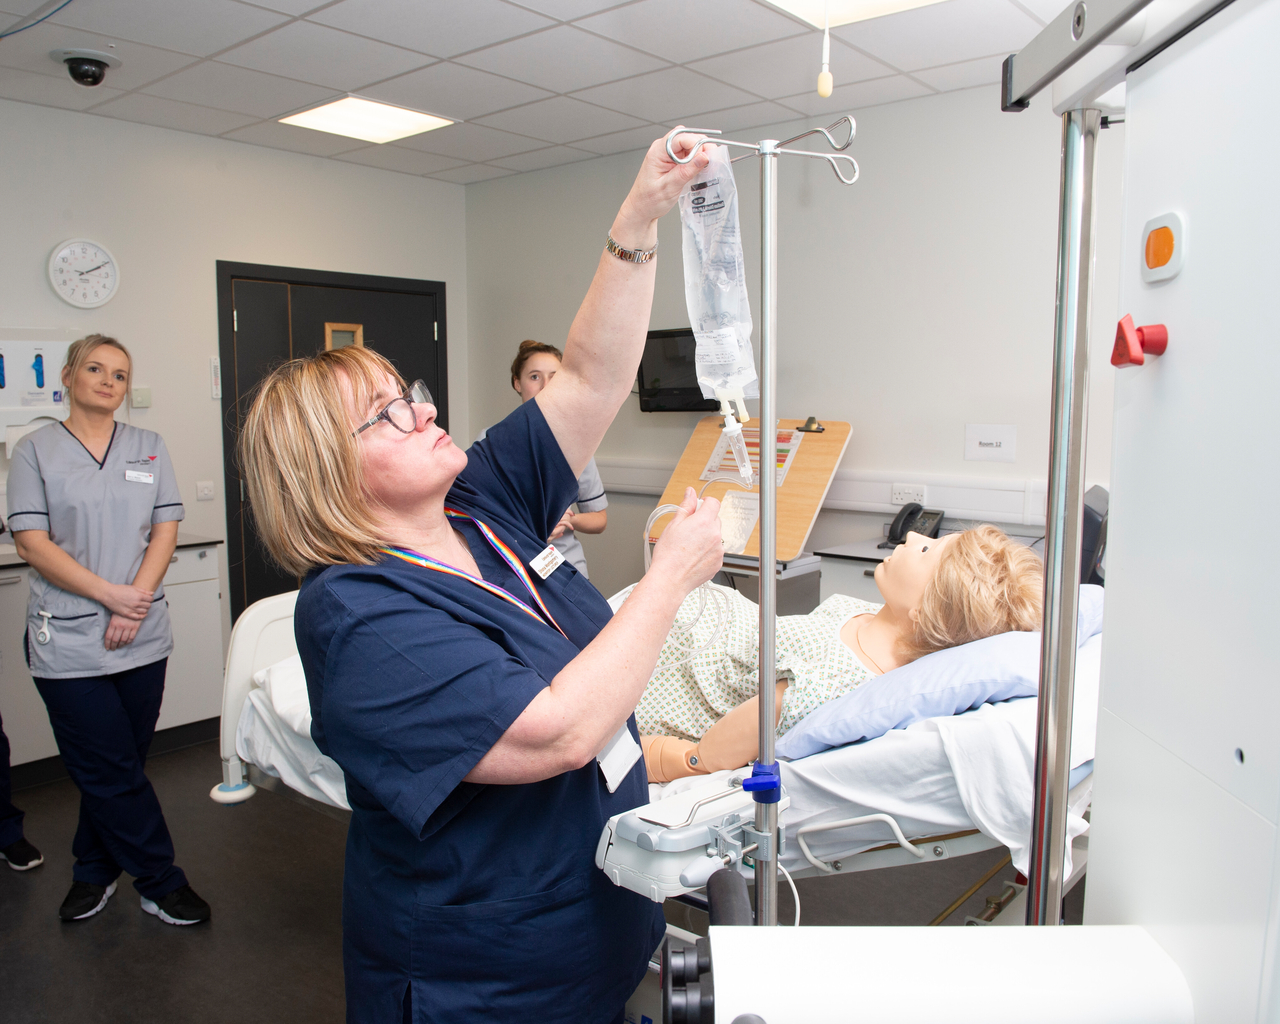 Student nurses practise clinical skills in the Simulation Centre's Ward setting